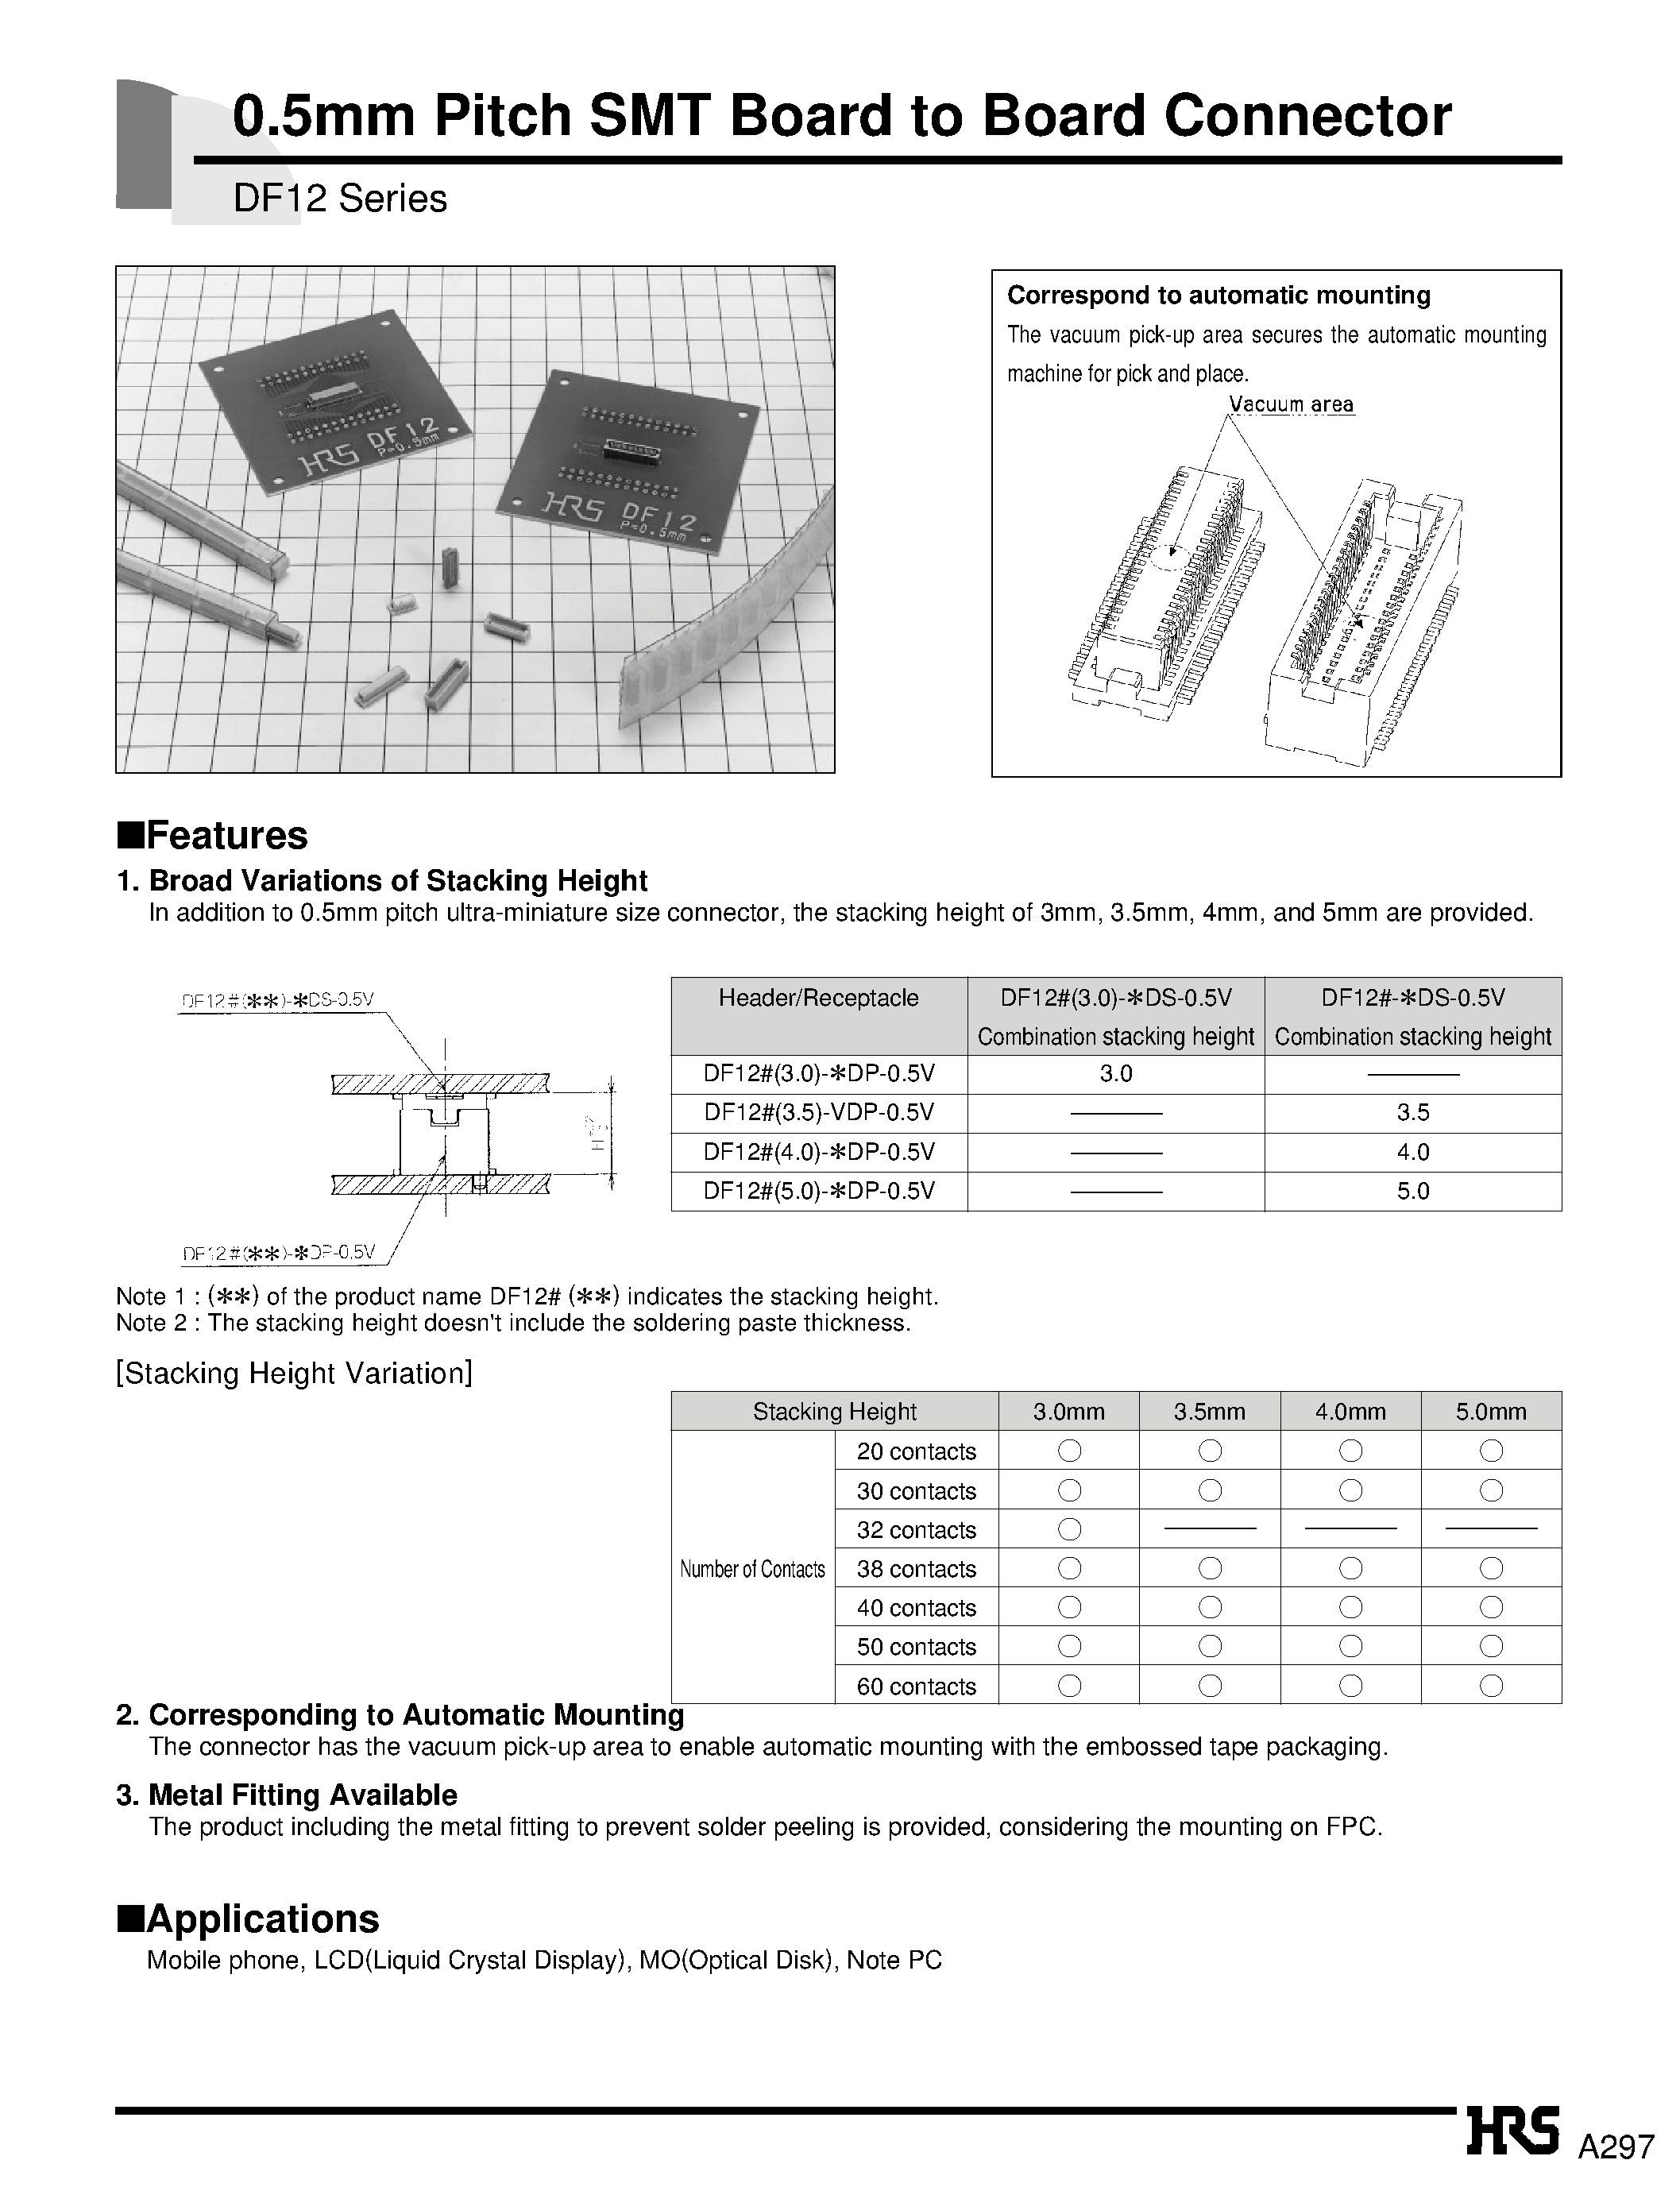 Datasheet DF12-36DP-0.5V - 0.5mm Pitch SMT Board to Board Connector page 1